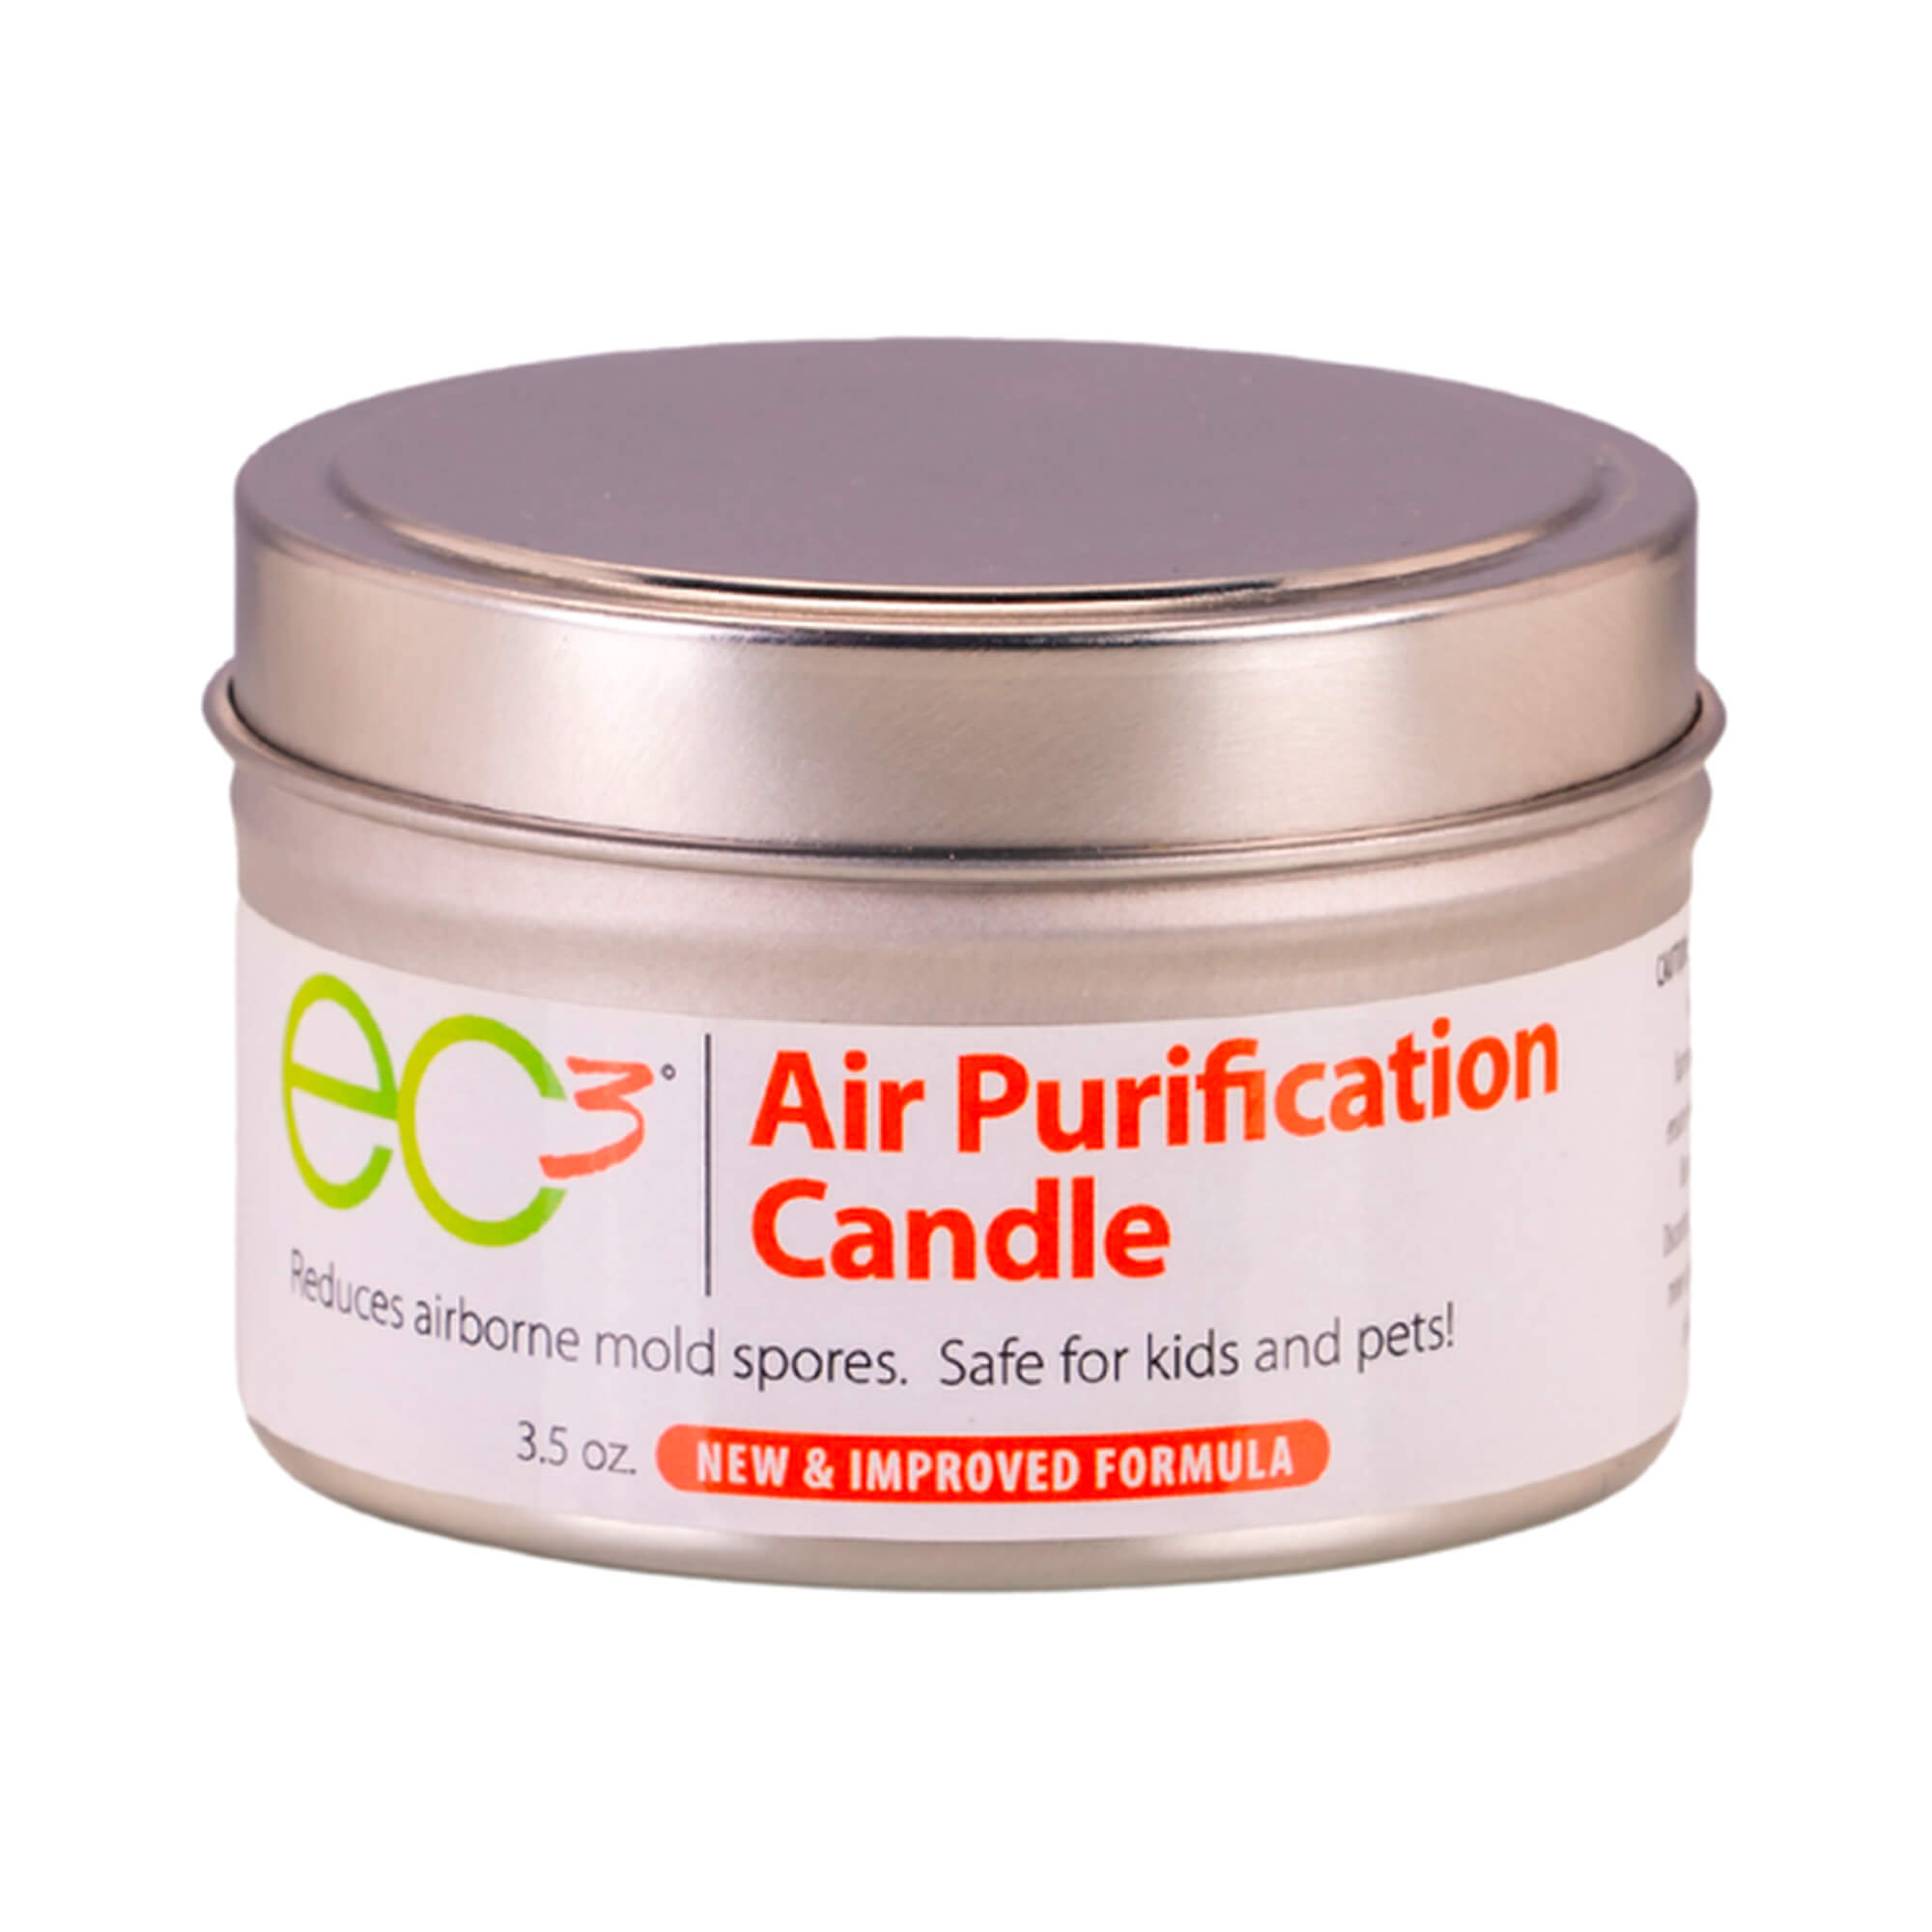 EC3 Air Purification Candle  Reduce the Mold Count in Your Home